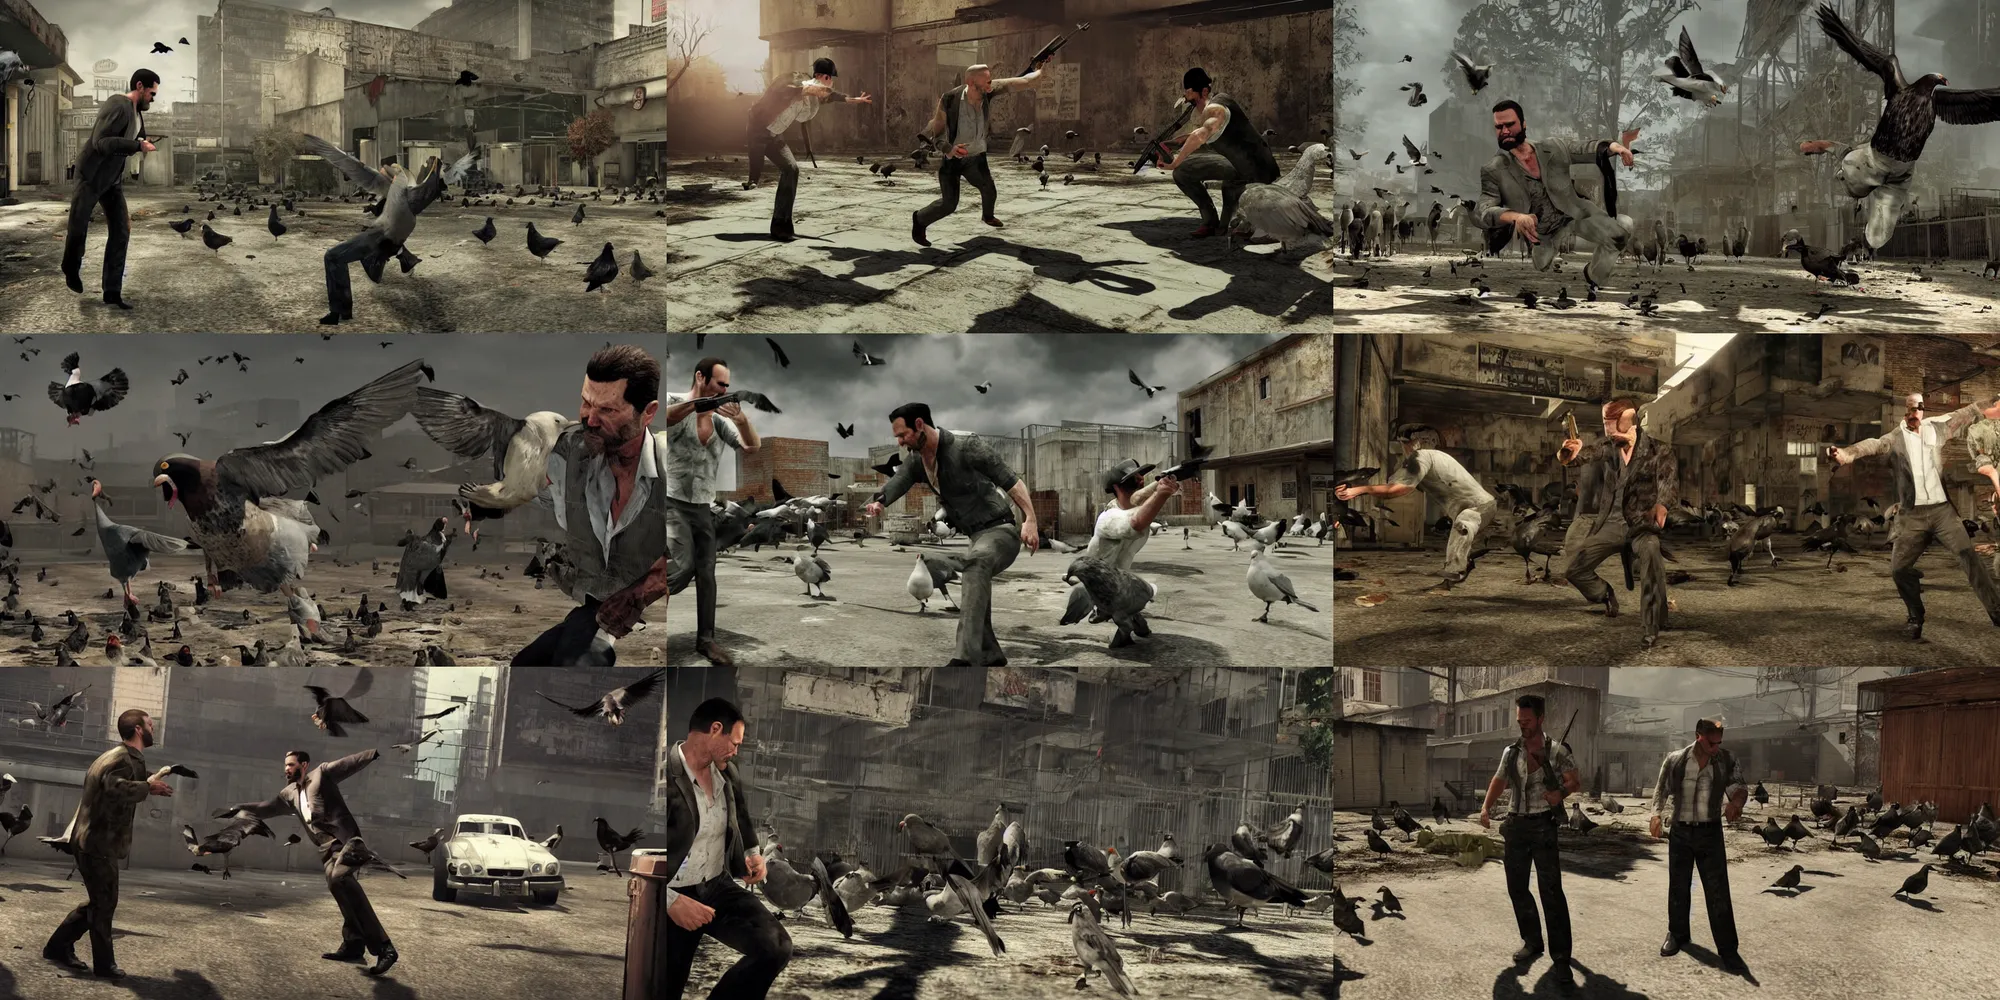 Prompt: A promo screenshot from Max Payne 4: The Flight of Max Payne, which features Max Payne becoming a famous pigeon rancher in post-collapse America. Max Payne is forced to fight for his flock across the nation when a band of rustlers rudely disrupt his operation. Little does Max know- not all pigeons are friendly!